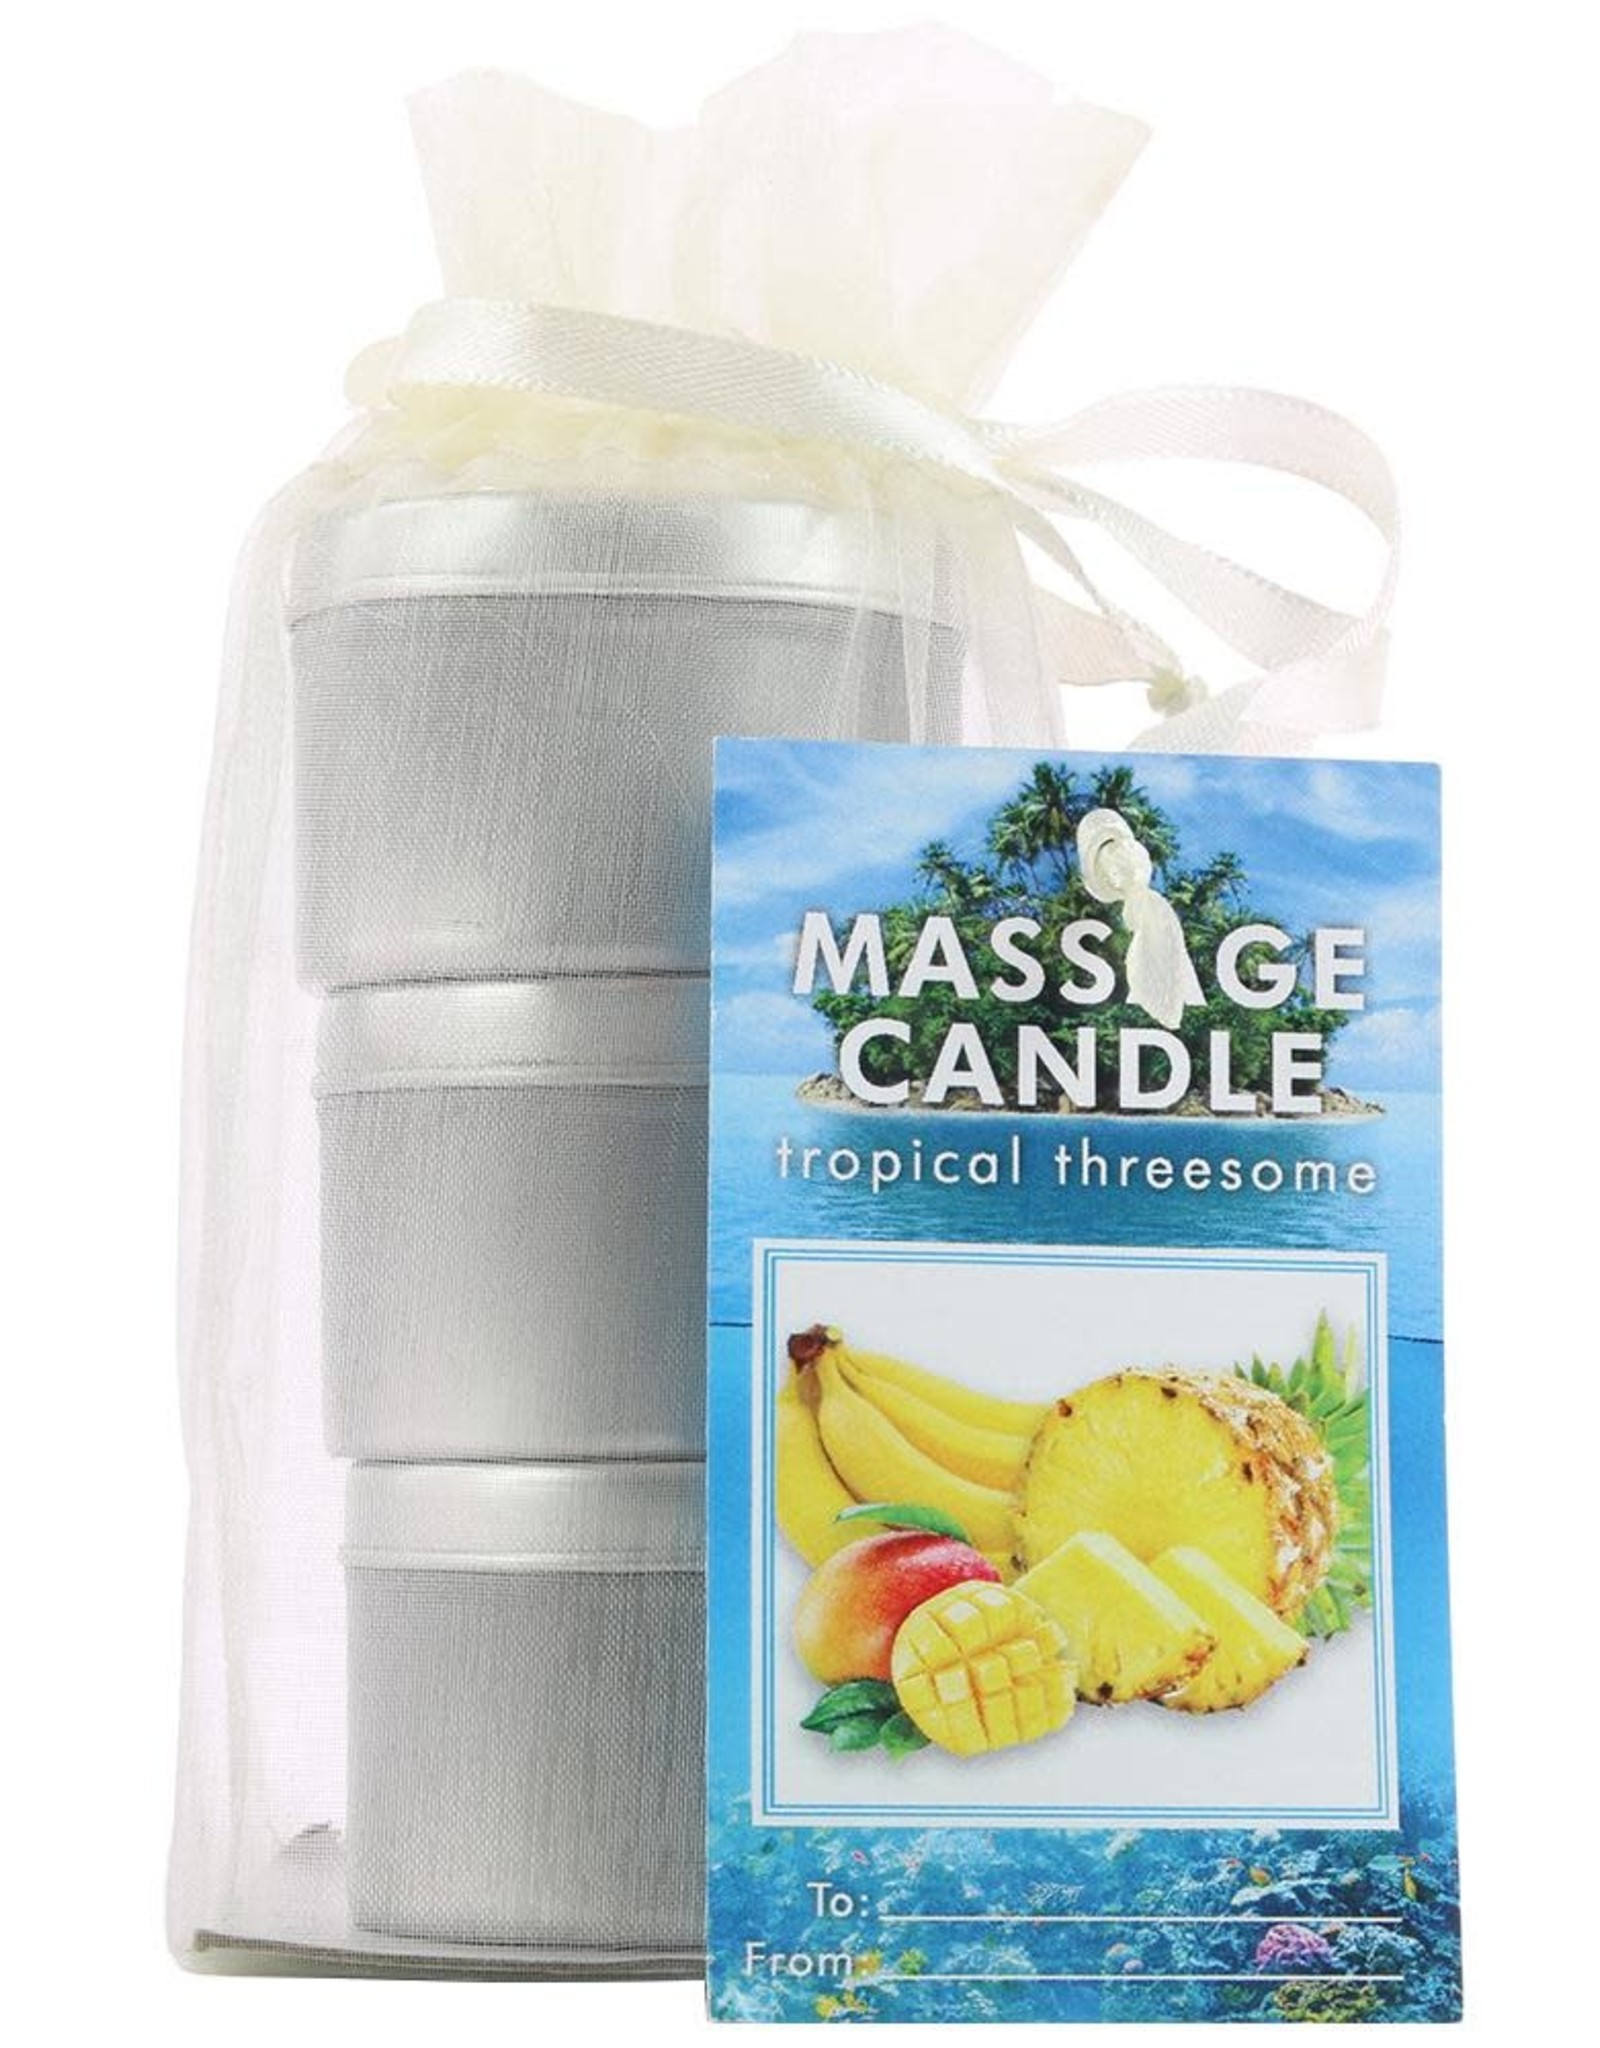 Earthly Body 3-in-1 Candle Trio Gift Bag - Tropical Threesome